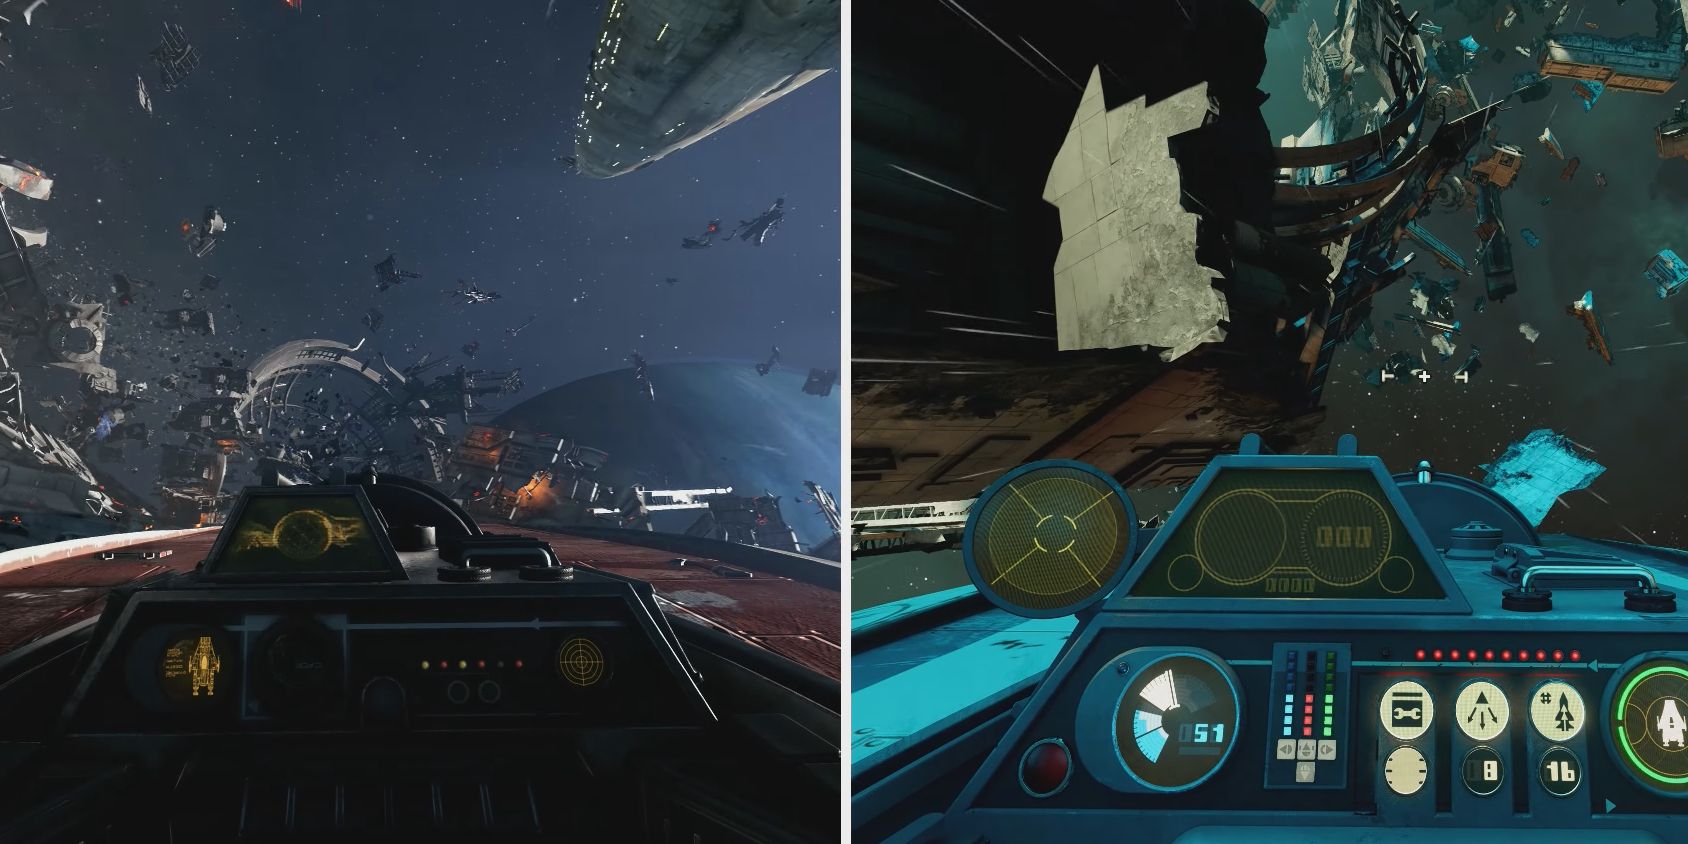 Star Wars Squadrons Compared To Battlefront 2’s Starfighter Assault